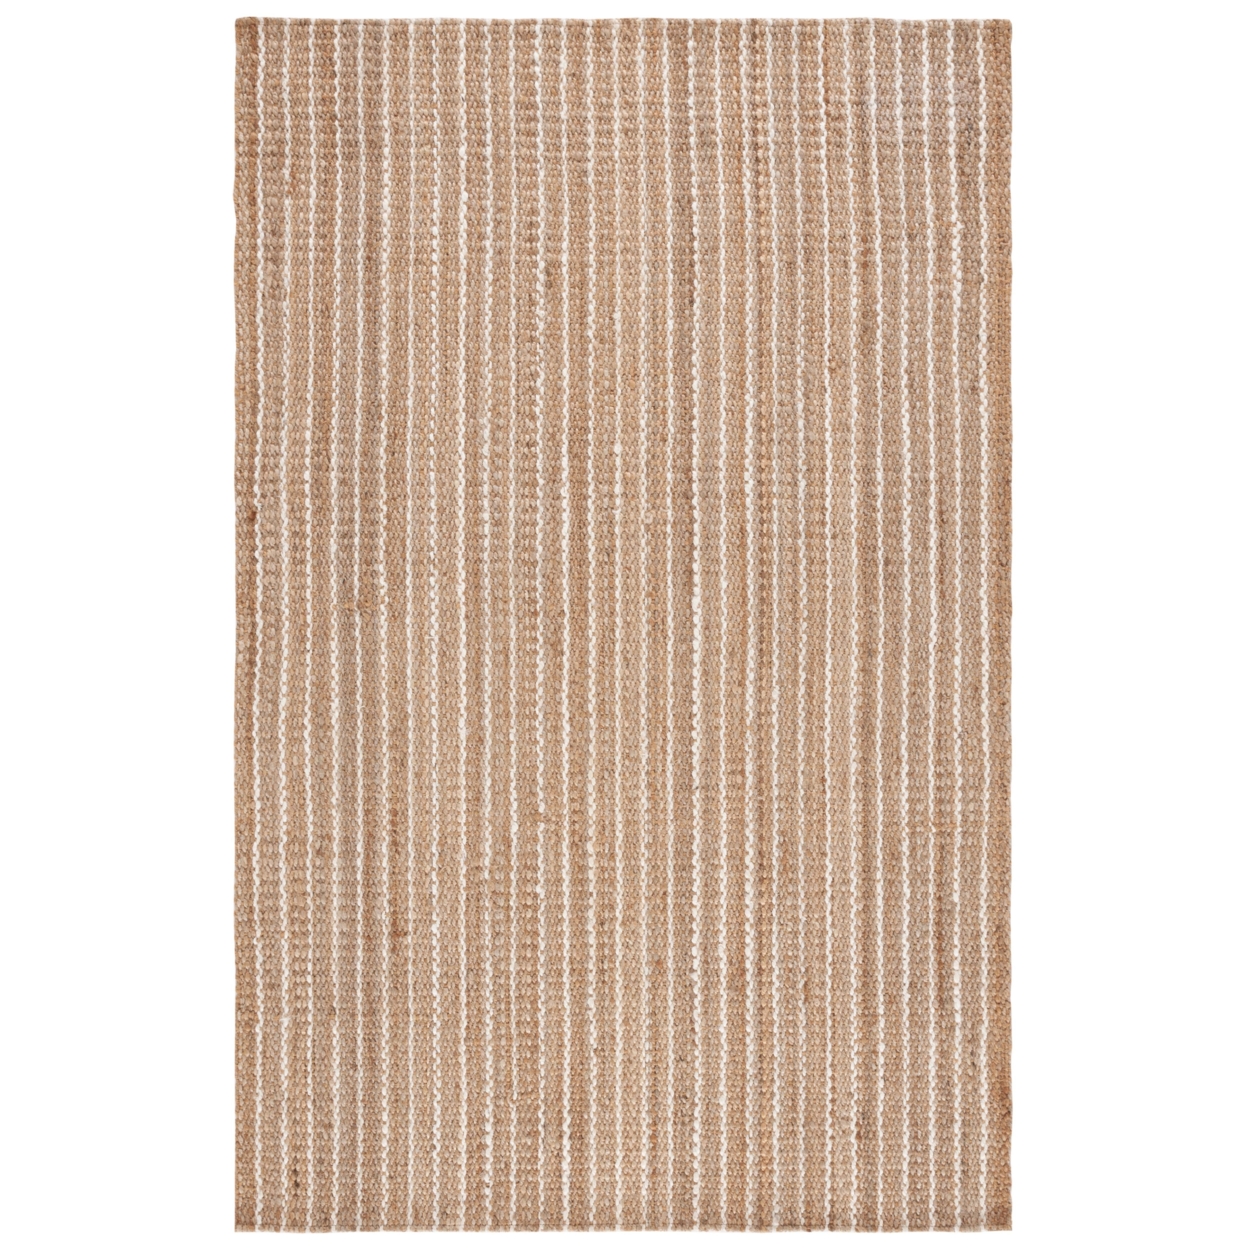 Safavieh NF735A Natural Fiber Natural / Ivory - Rust / Ivory, 8' X 10' Rectangle